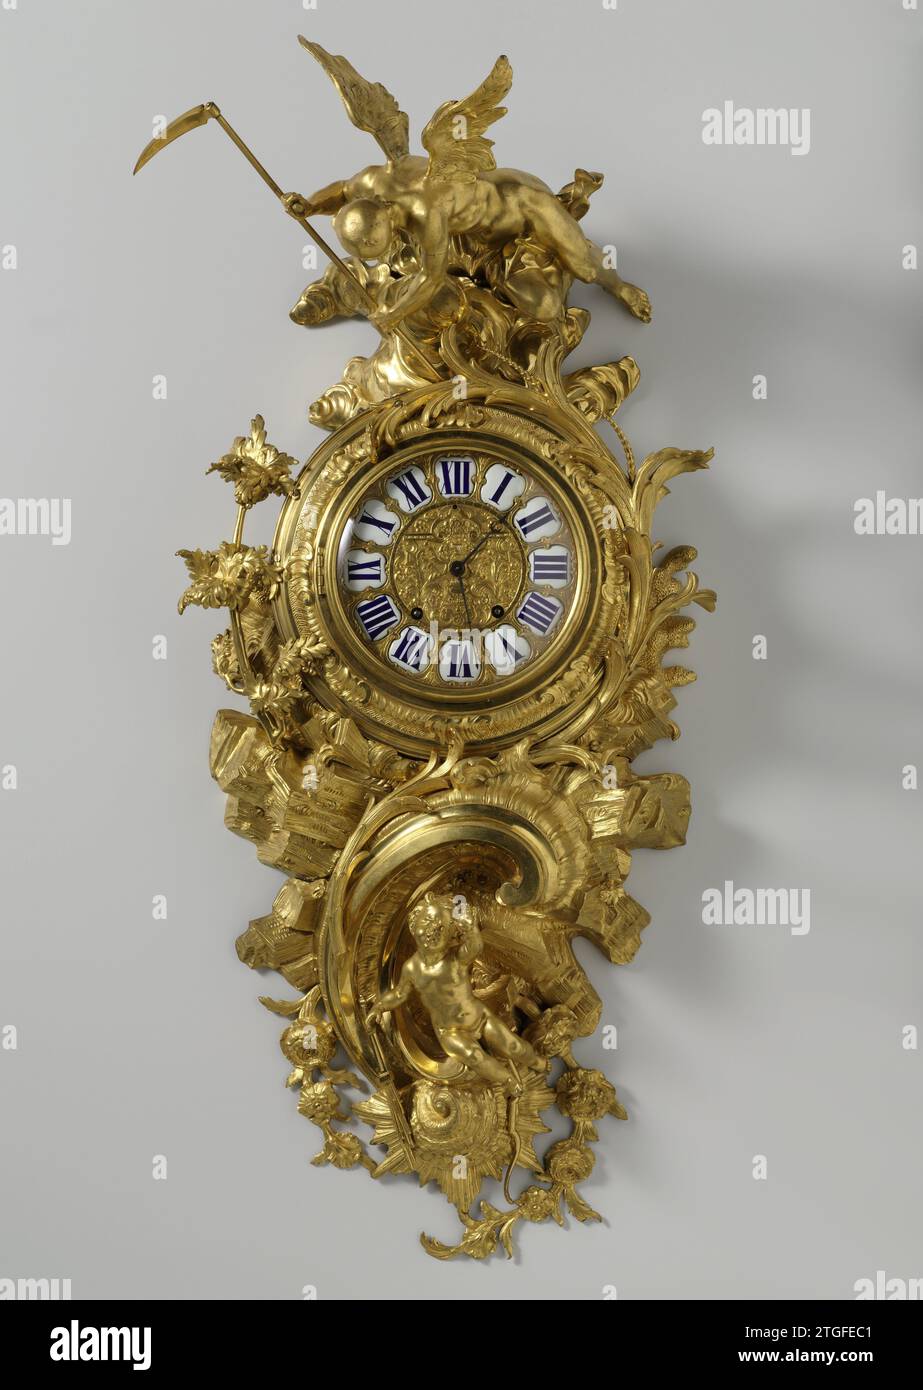 Cartel clock, Charles Cressent, c. 1740 - c. 1745 Proposing cartel pendula of gilded bronze: time overcomes love. Above the round dial with low relief and enamelled number plates, is on a cloud, the winged forward -bent figure of time with scythe; Below it is Cupido on a large C-Volut, surrounded by boulders, with vast left hand. The arrow sleeve falls from the right hand; The bow is behind his legs. At the bottom a large shell surrounded by flower branches; A flower and palm branch around the dial. Paris `: oak (wood). kingwood (wood). bronze (metal). brass (alloy). gilding Proposing cartel p Stock Photo